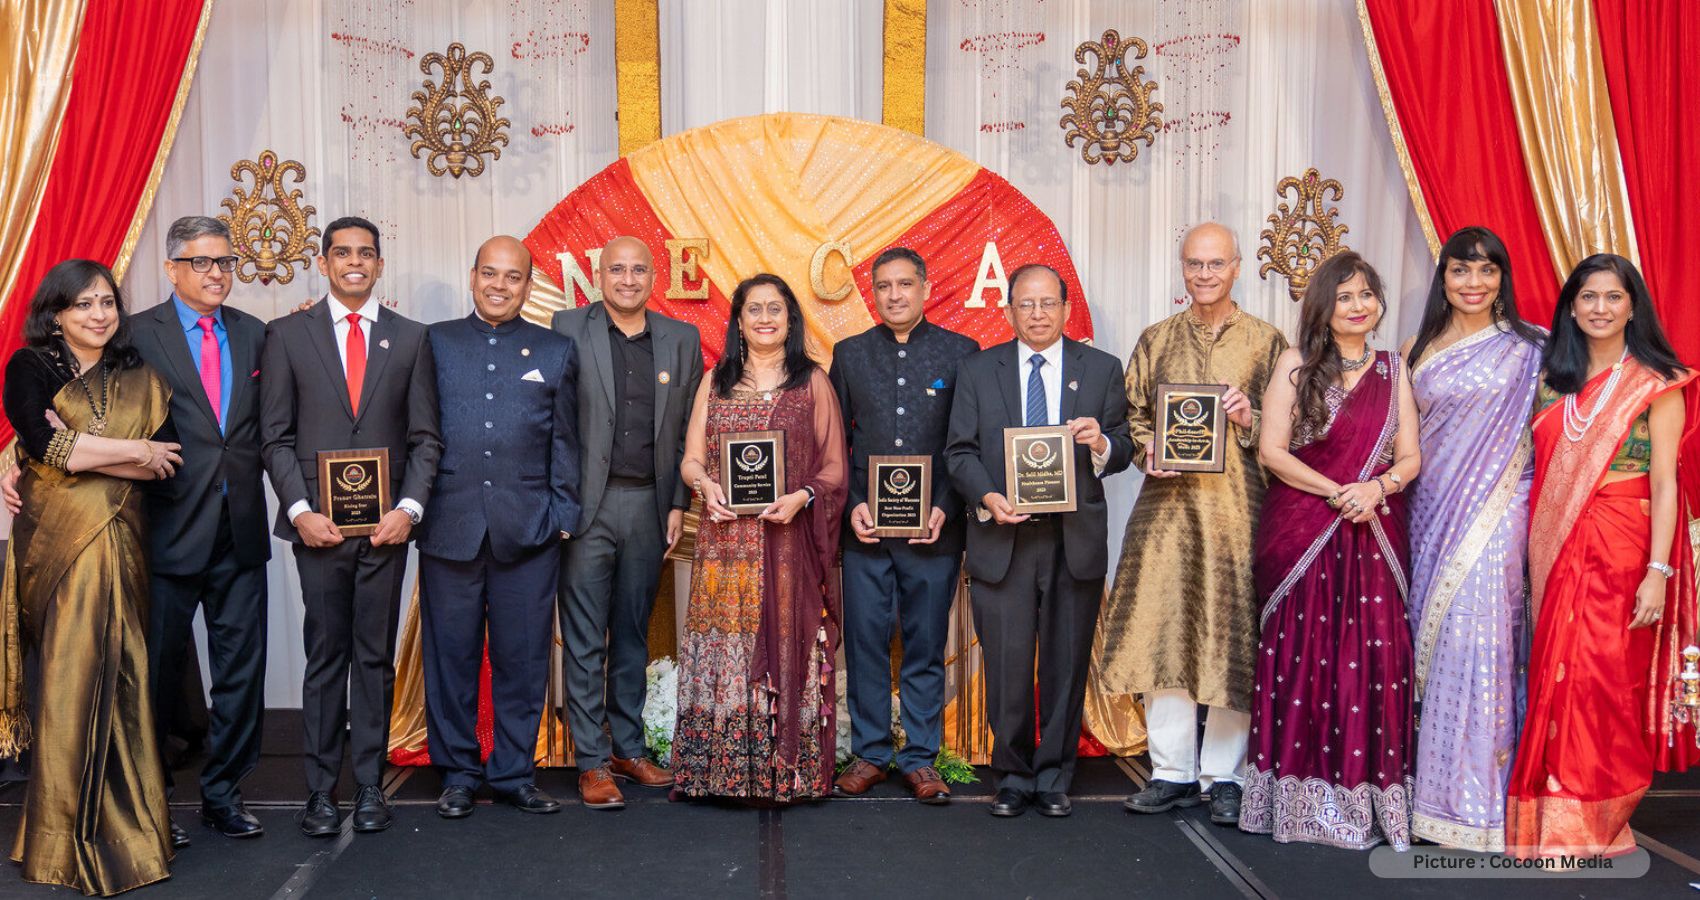 Featured & Cover New England Choice Awards Gala In Boston Celebrates Accomplishments of Indian Americans (Cocoon Media) Cover